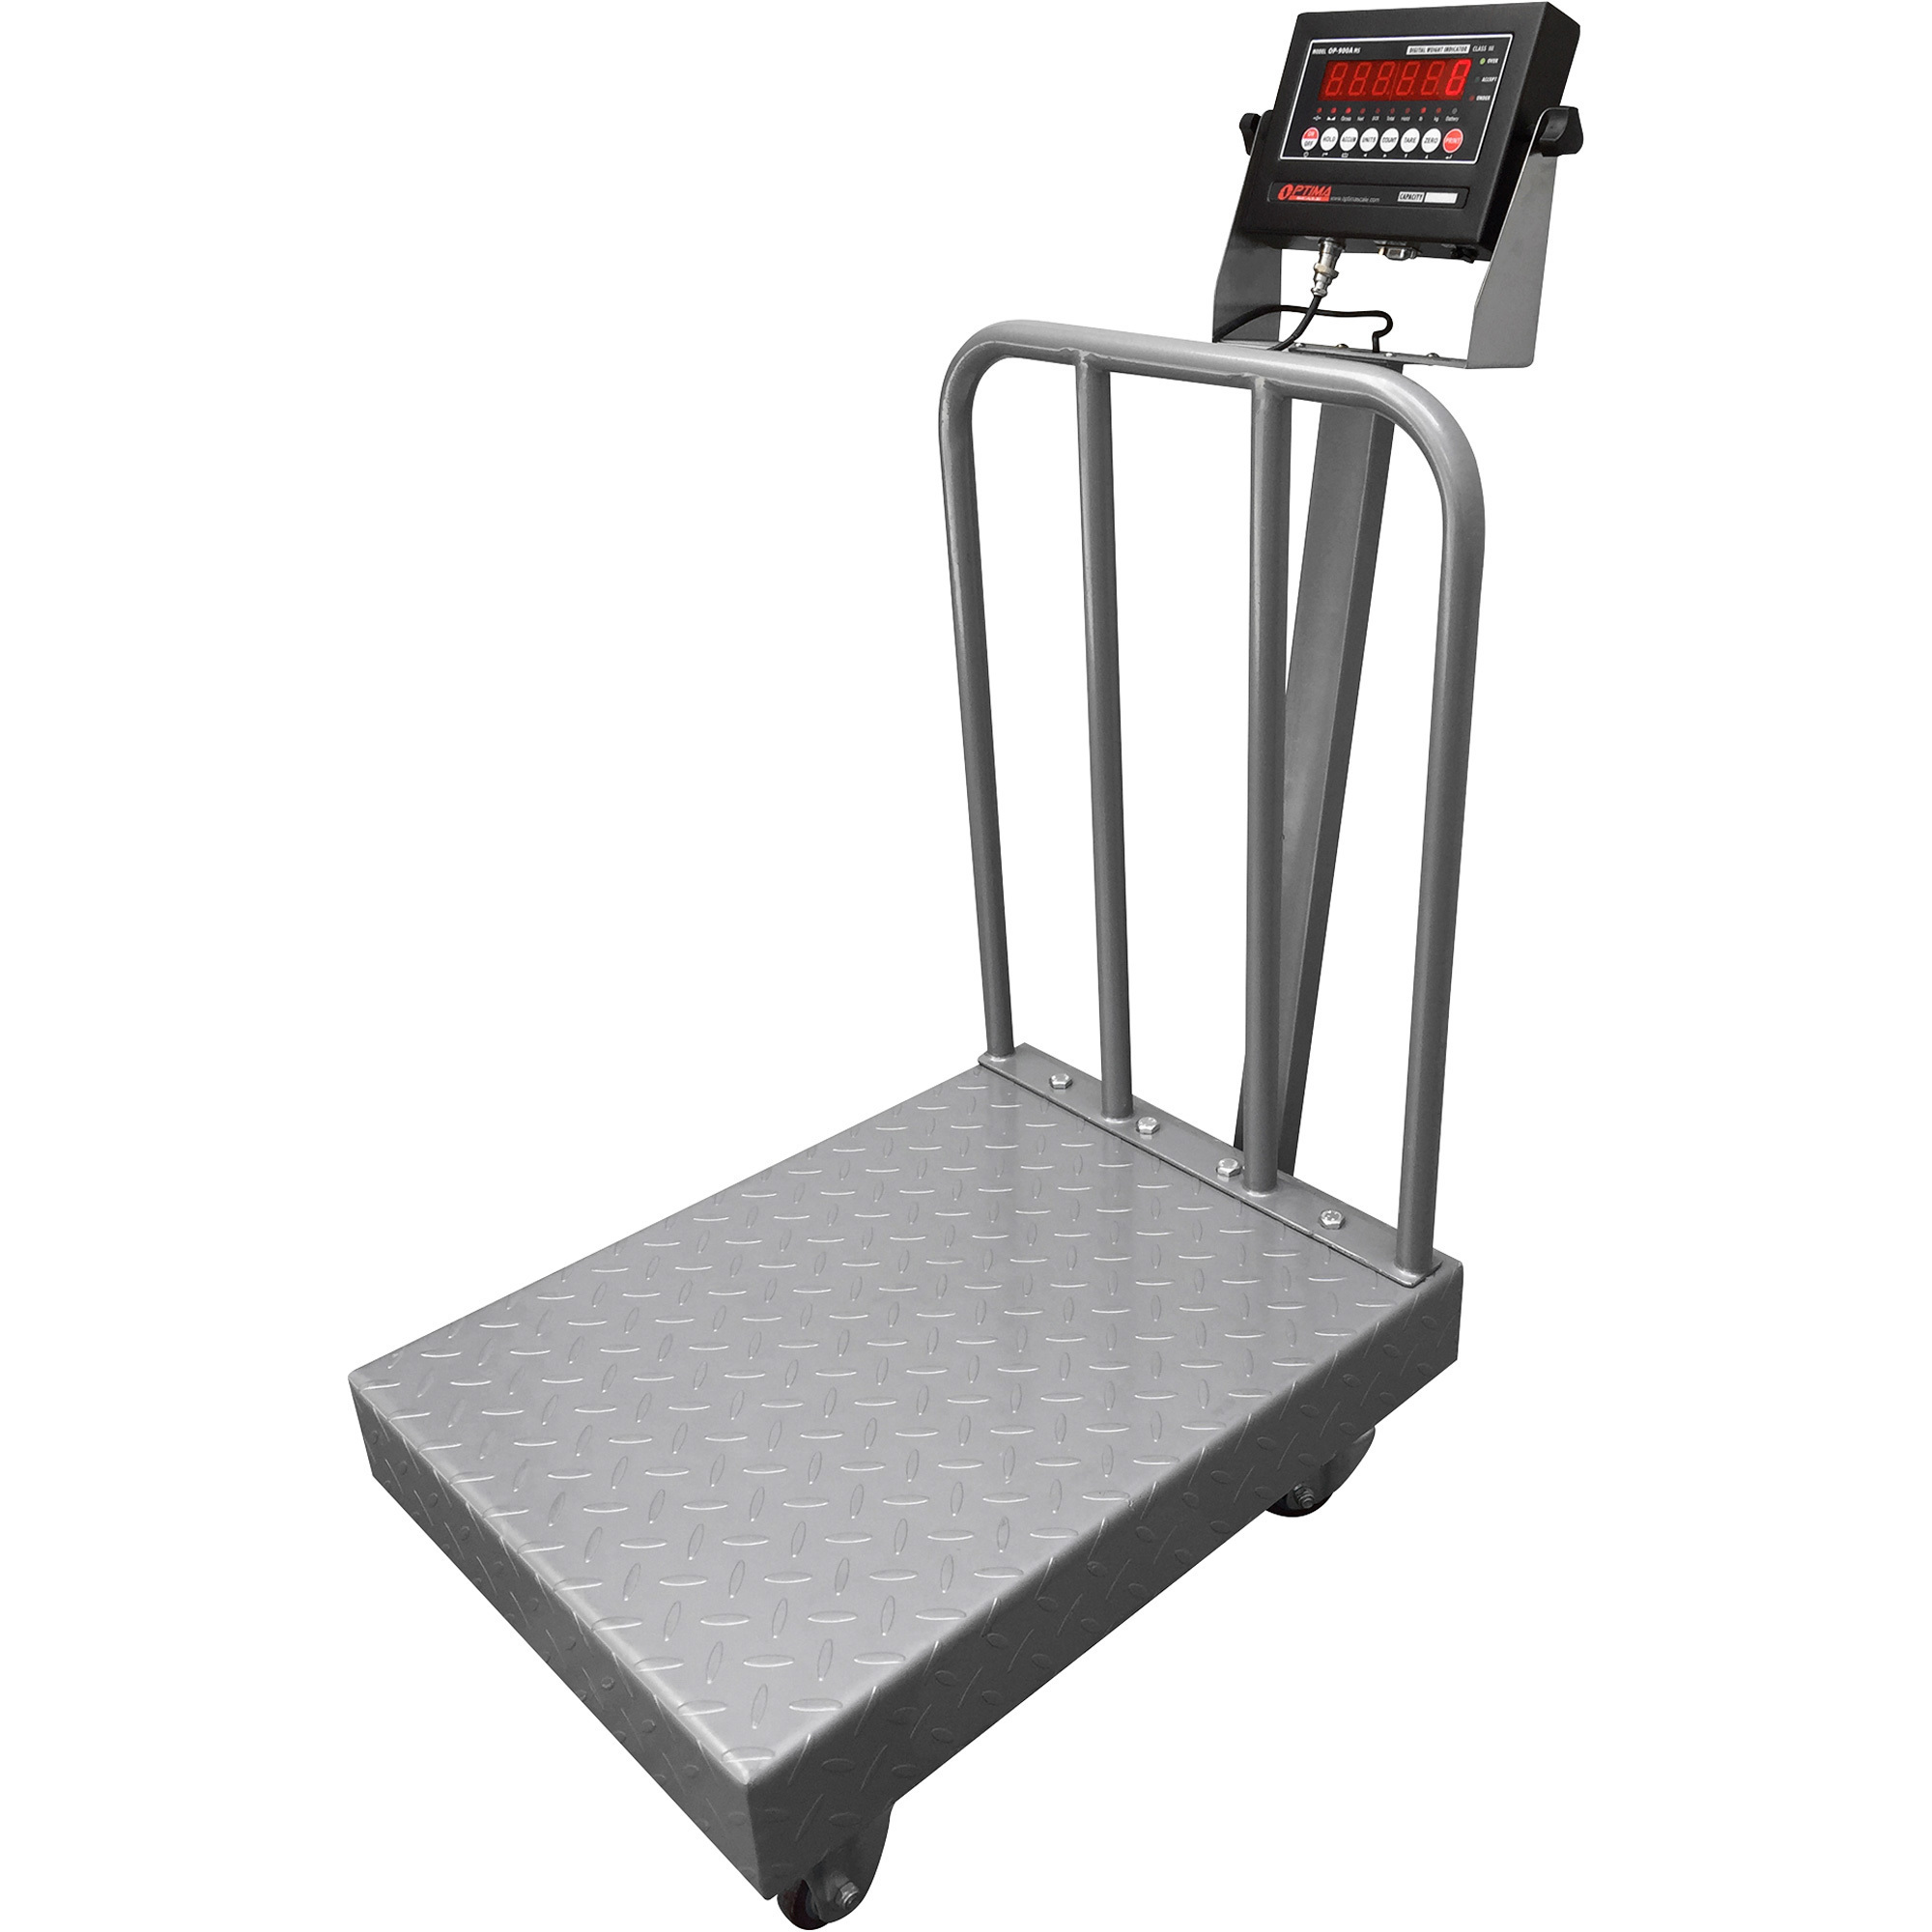 Optima 18Inch x 24Inch Portable Bench Scale — 500-Lb. Capacity, 0.1-Lb. Increment Display, Model OP-915BWDP-1824-500 -  OptimaScale